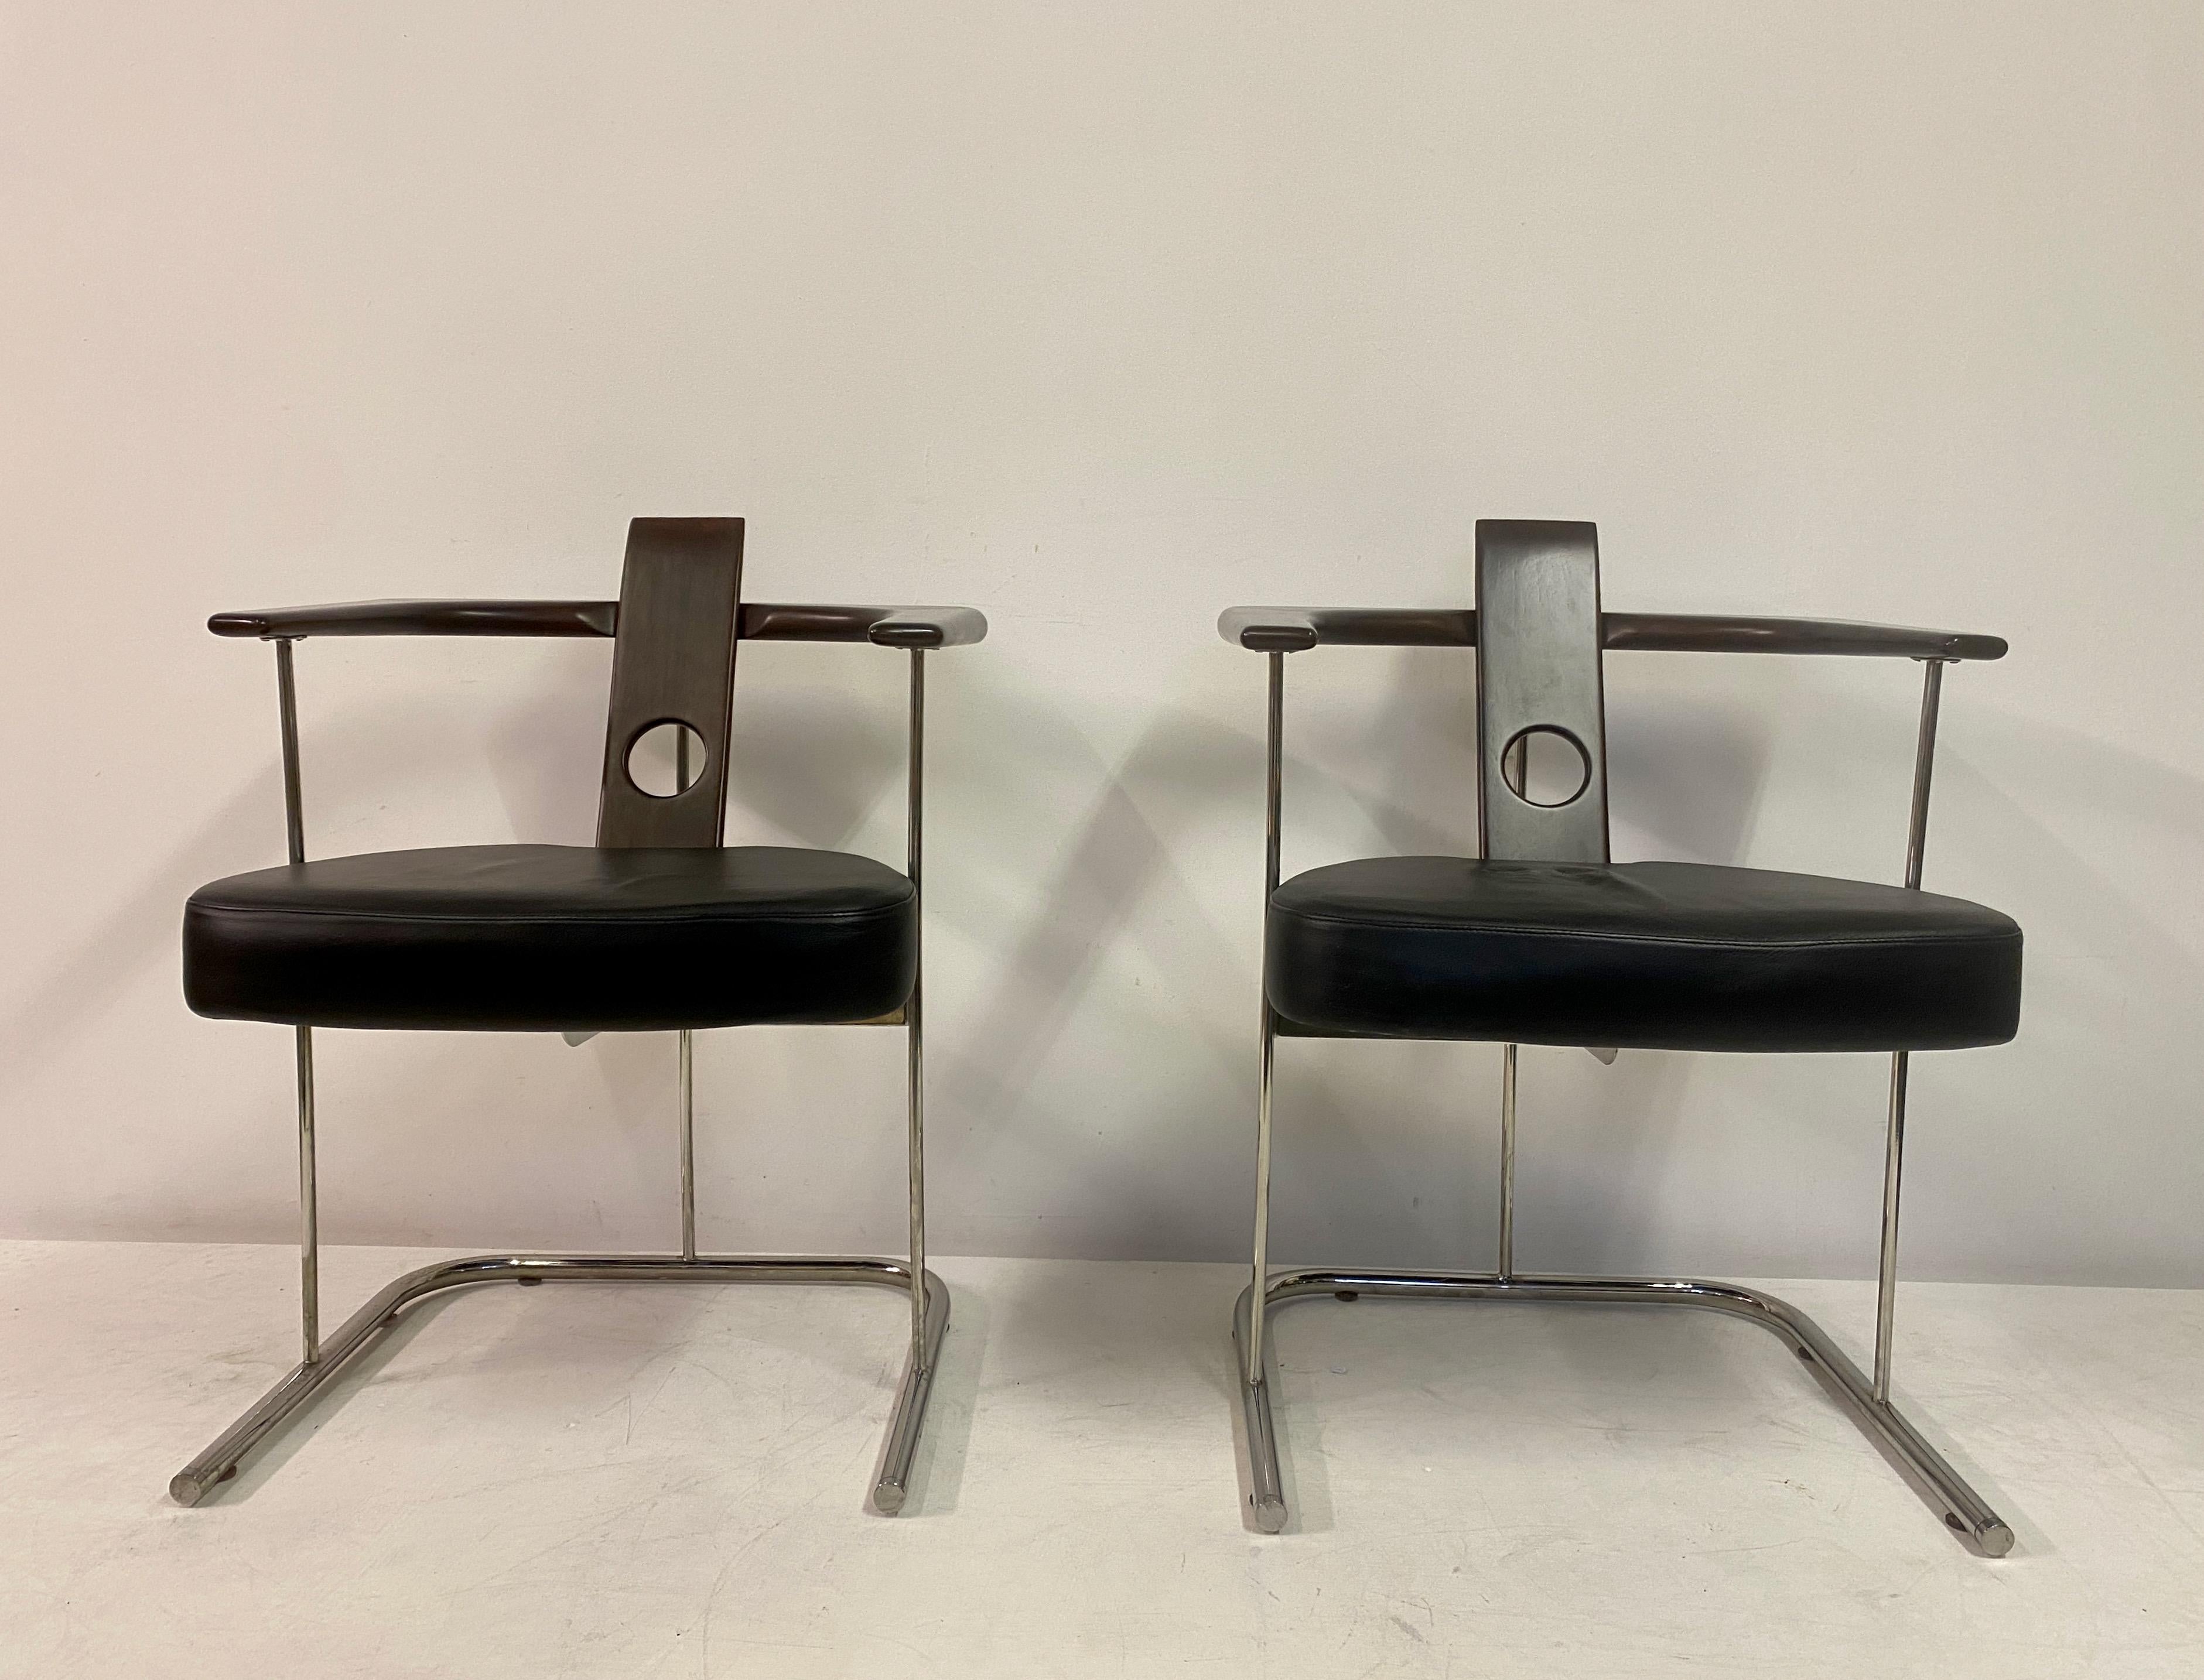 Pair of armchairs

Daav model

By Sergio Rodrigues

Stainless steel frame

Cherry wood arms

Leather seat

Brazil.